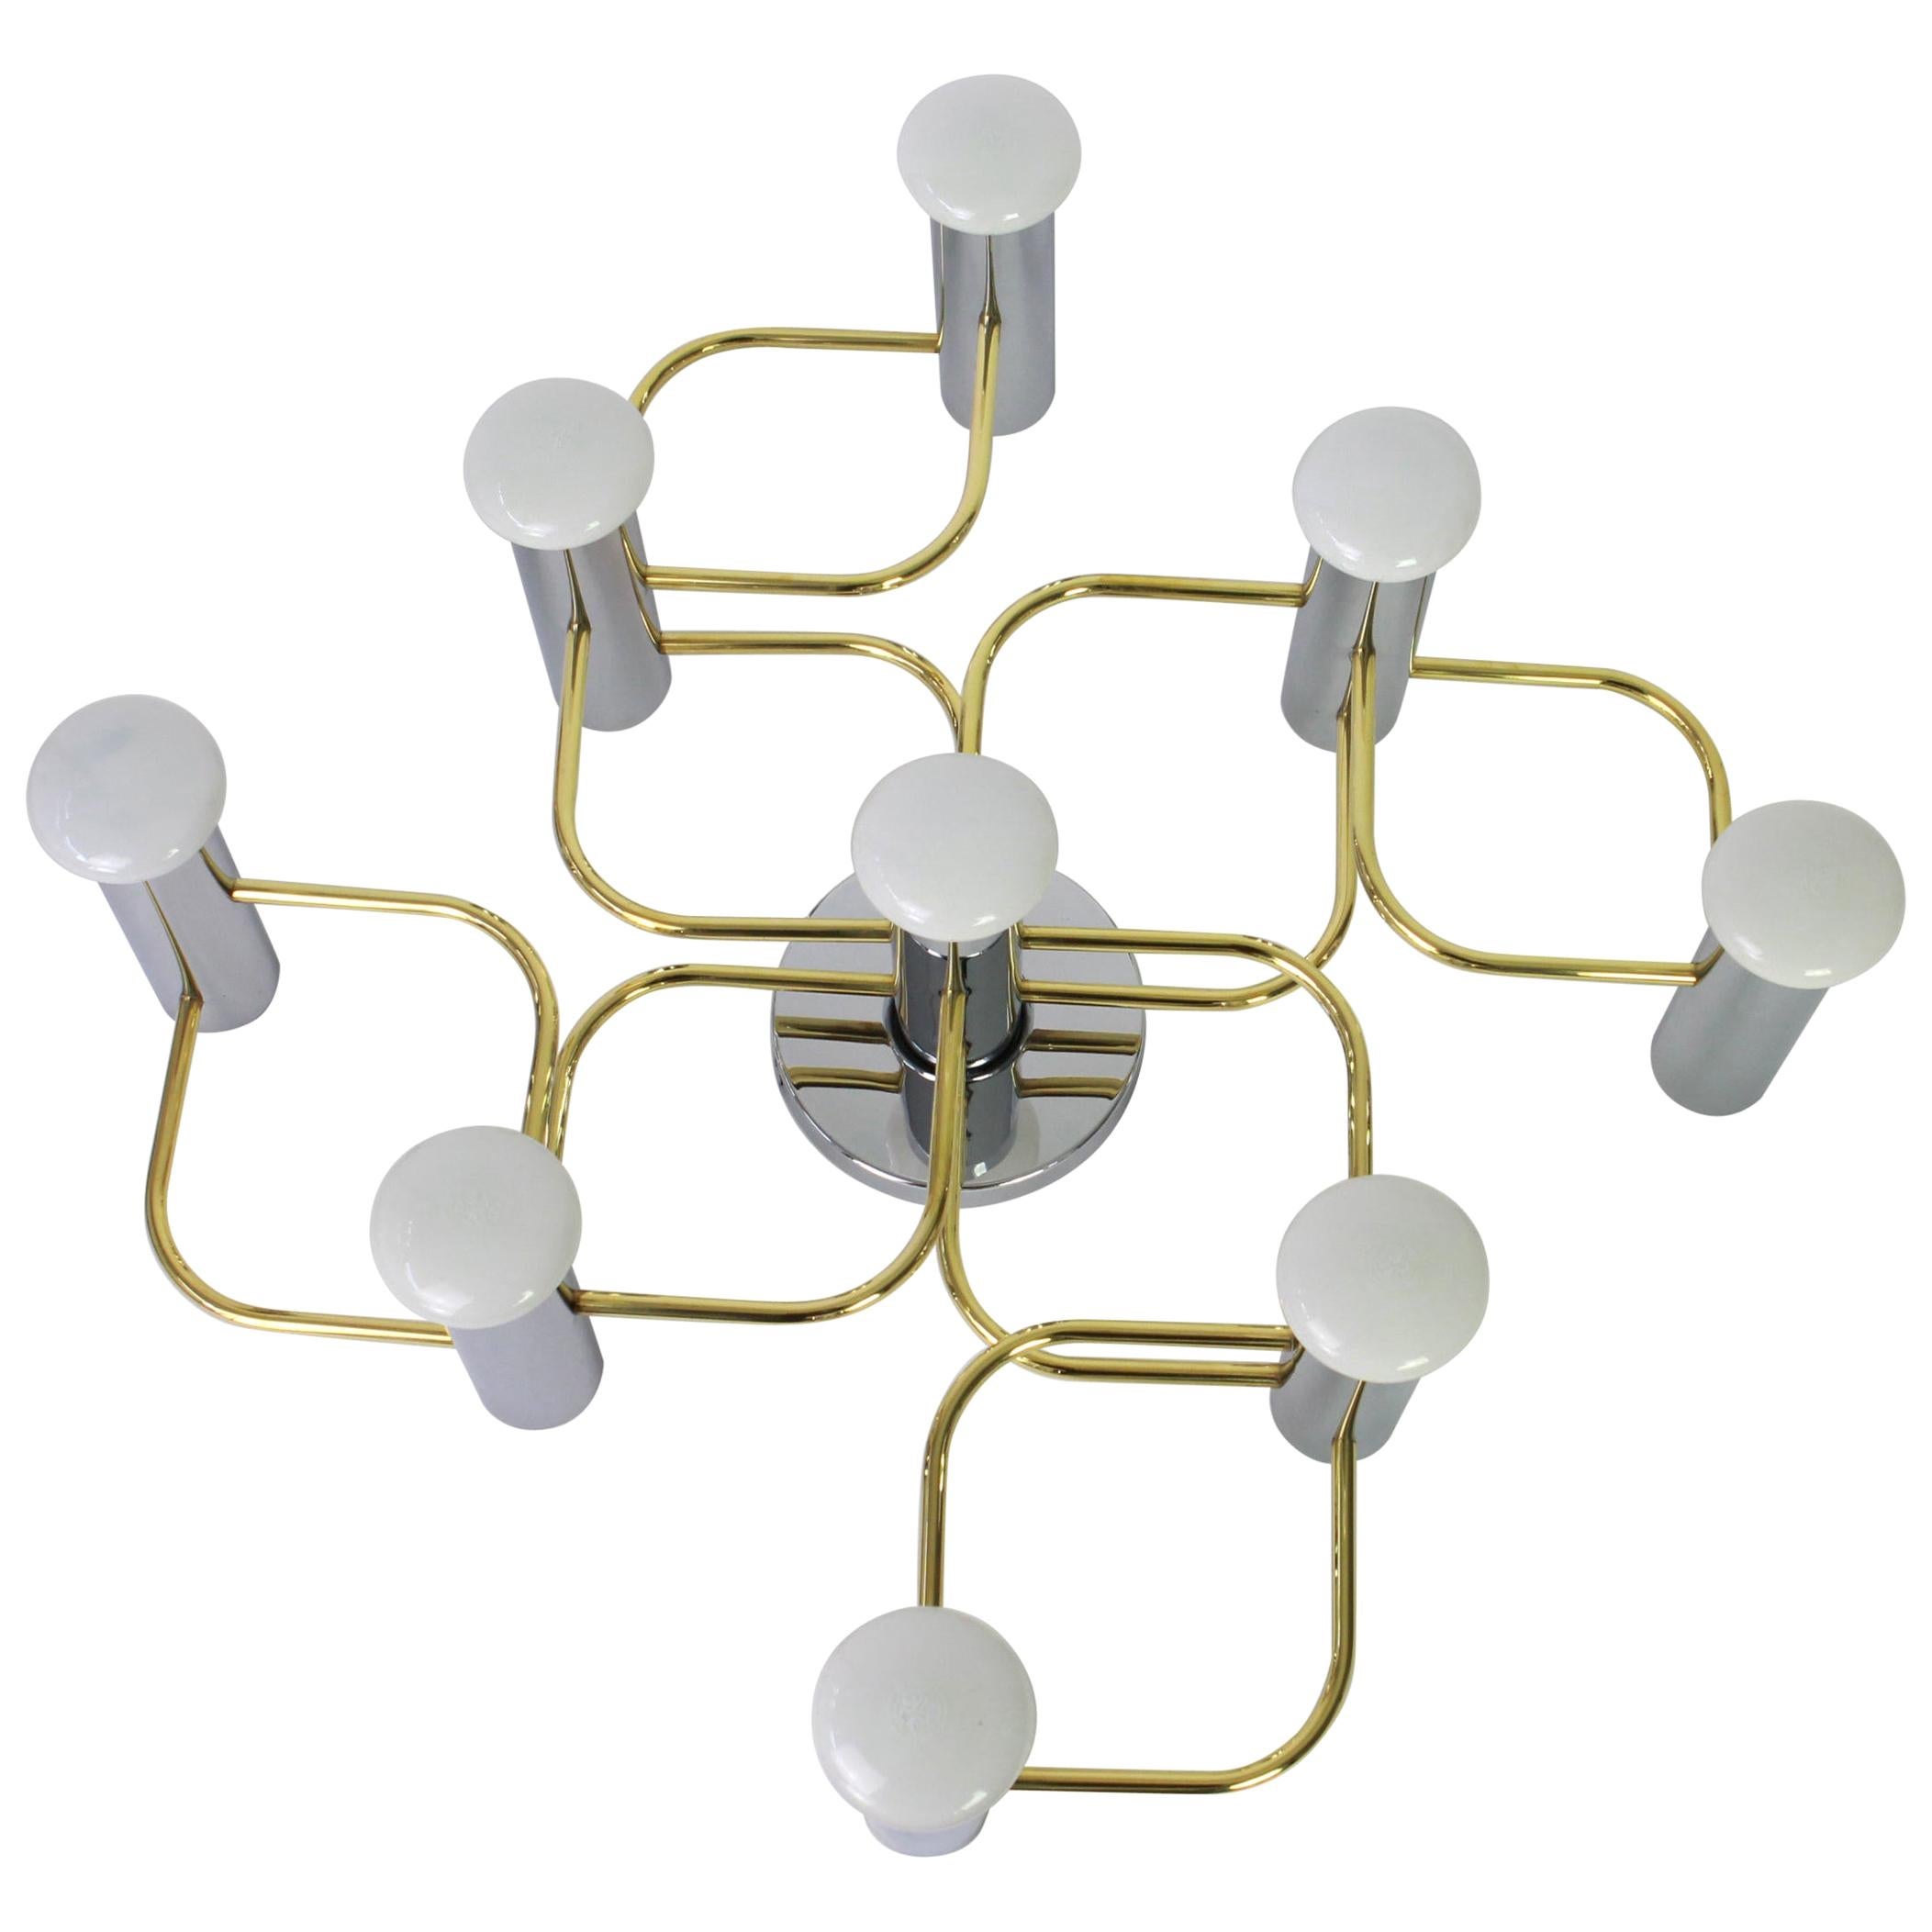 Stunning nine-light flushmount light fixture in chrome and brass, can be used as wall or ceiling light.
Design: Sciolari
Sockets: 9 x E14 small bulbs - max 40 watt each
Light bulbs are not included. It is possible to install this fixture in all